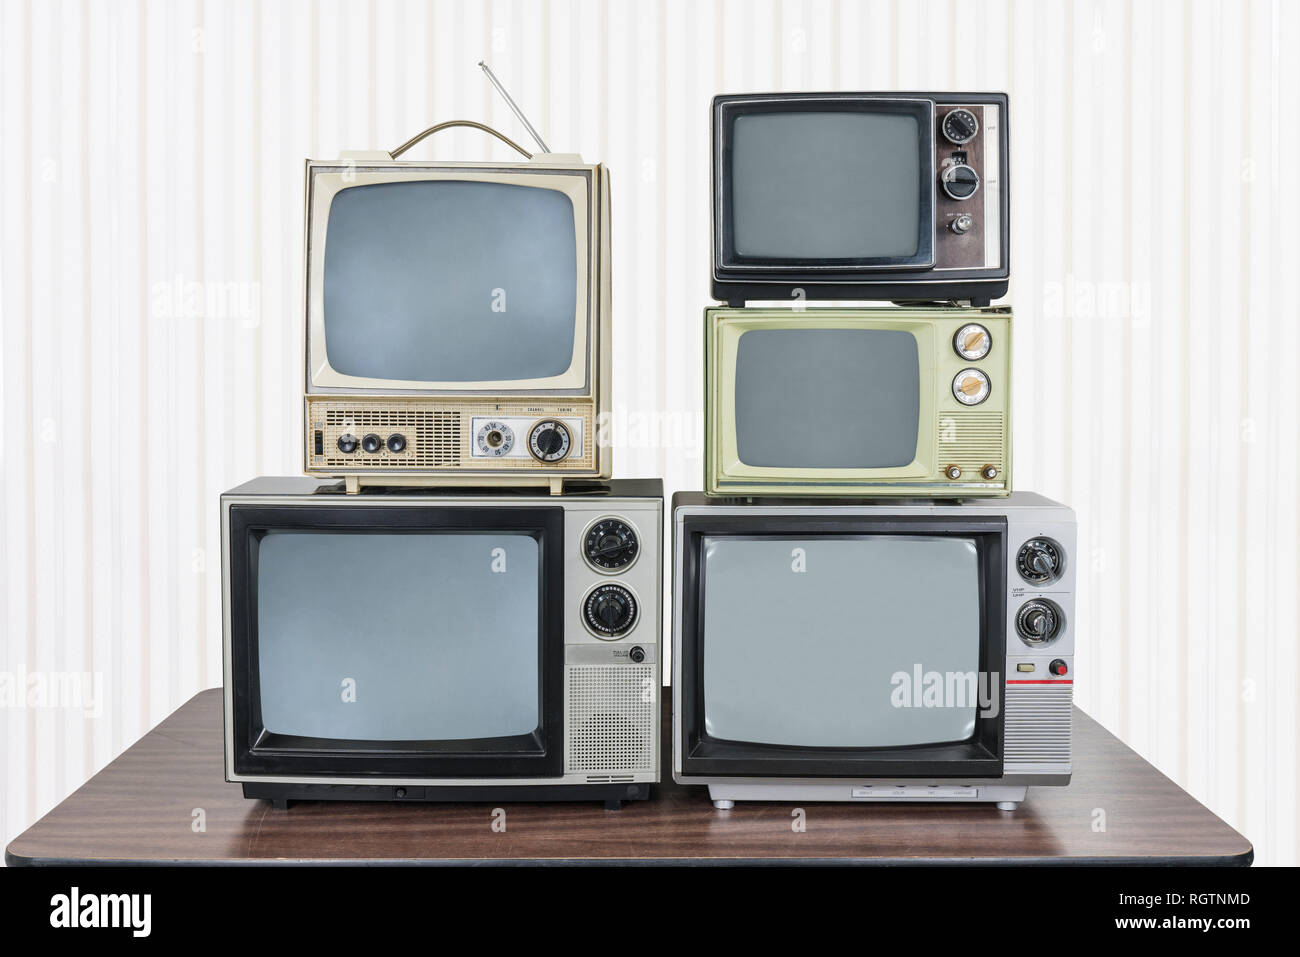 Five vintage televisions stacked on old wood table. Stock Photo